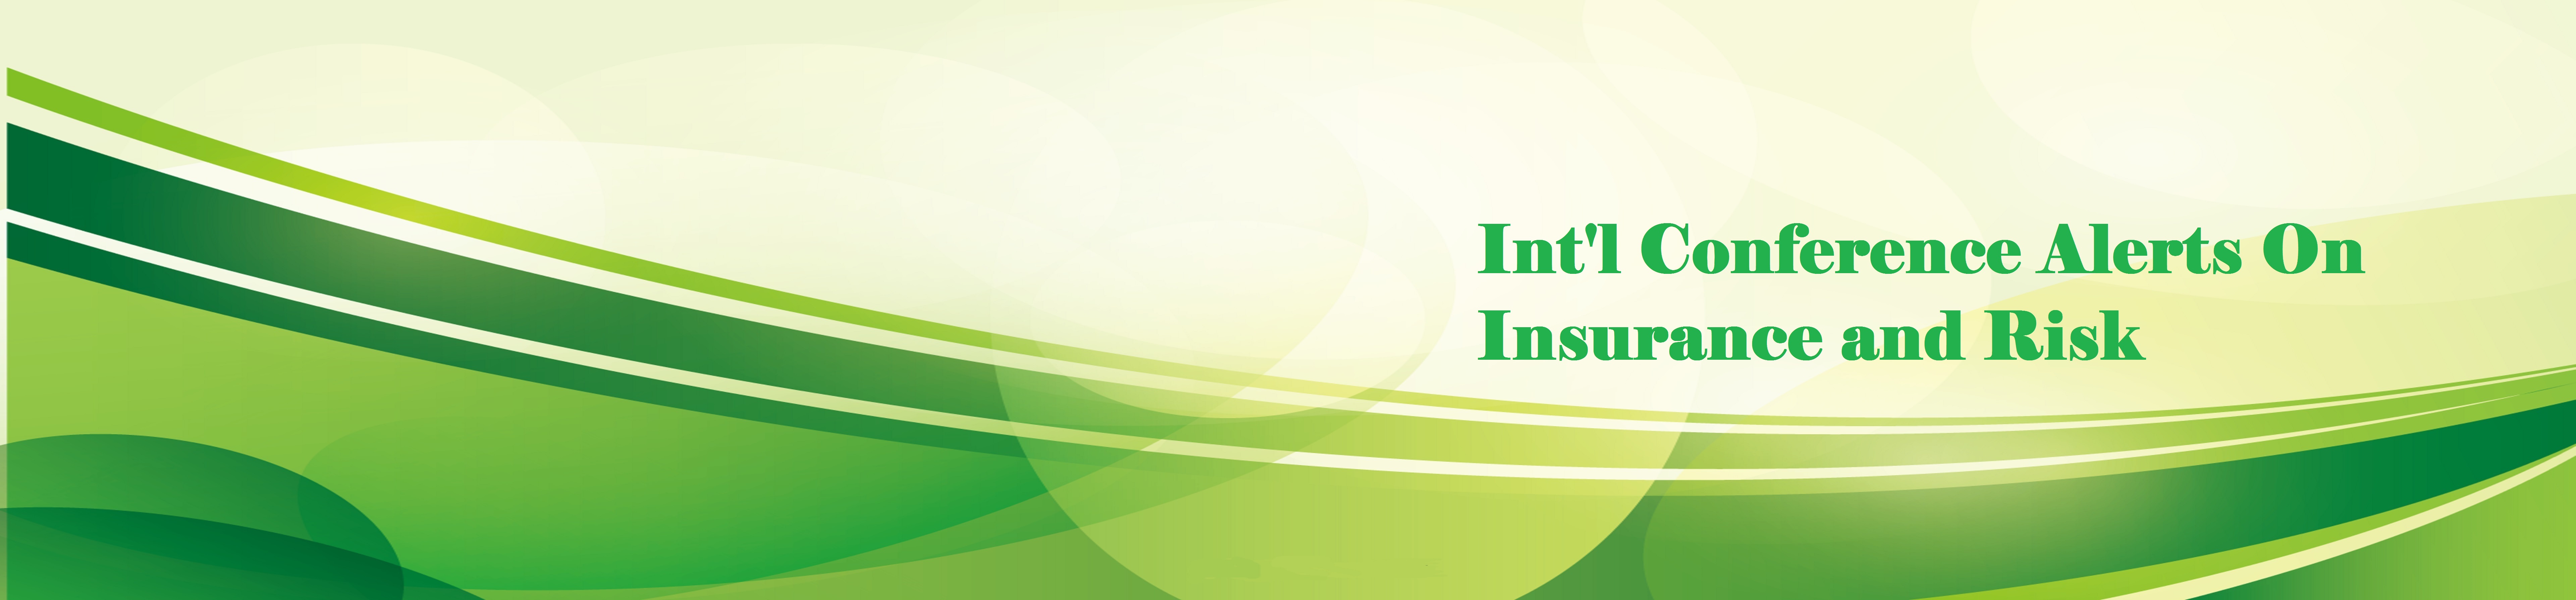 Int'l Conference Alerts On Insurance and Risk.jpg